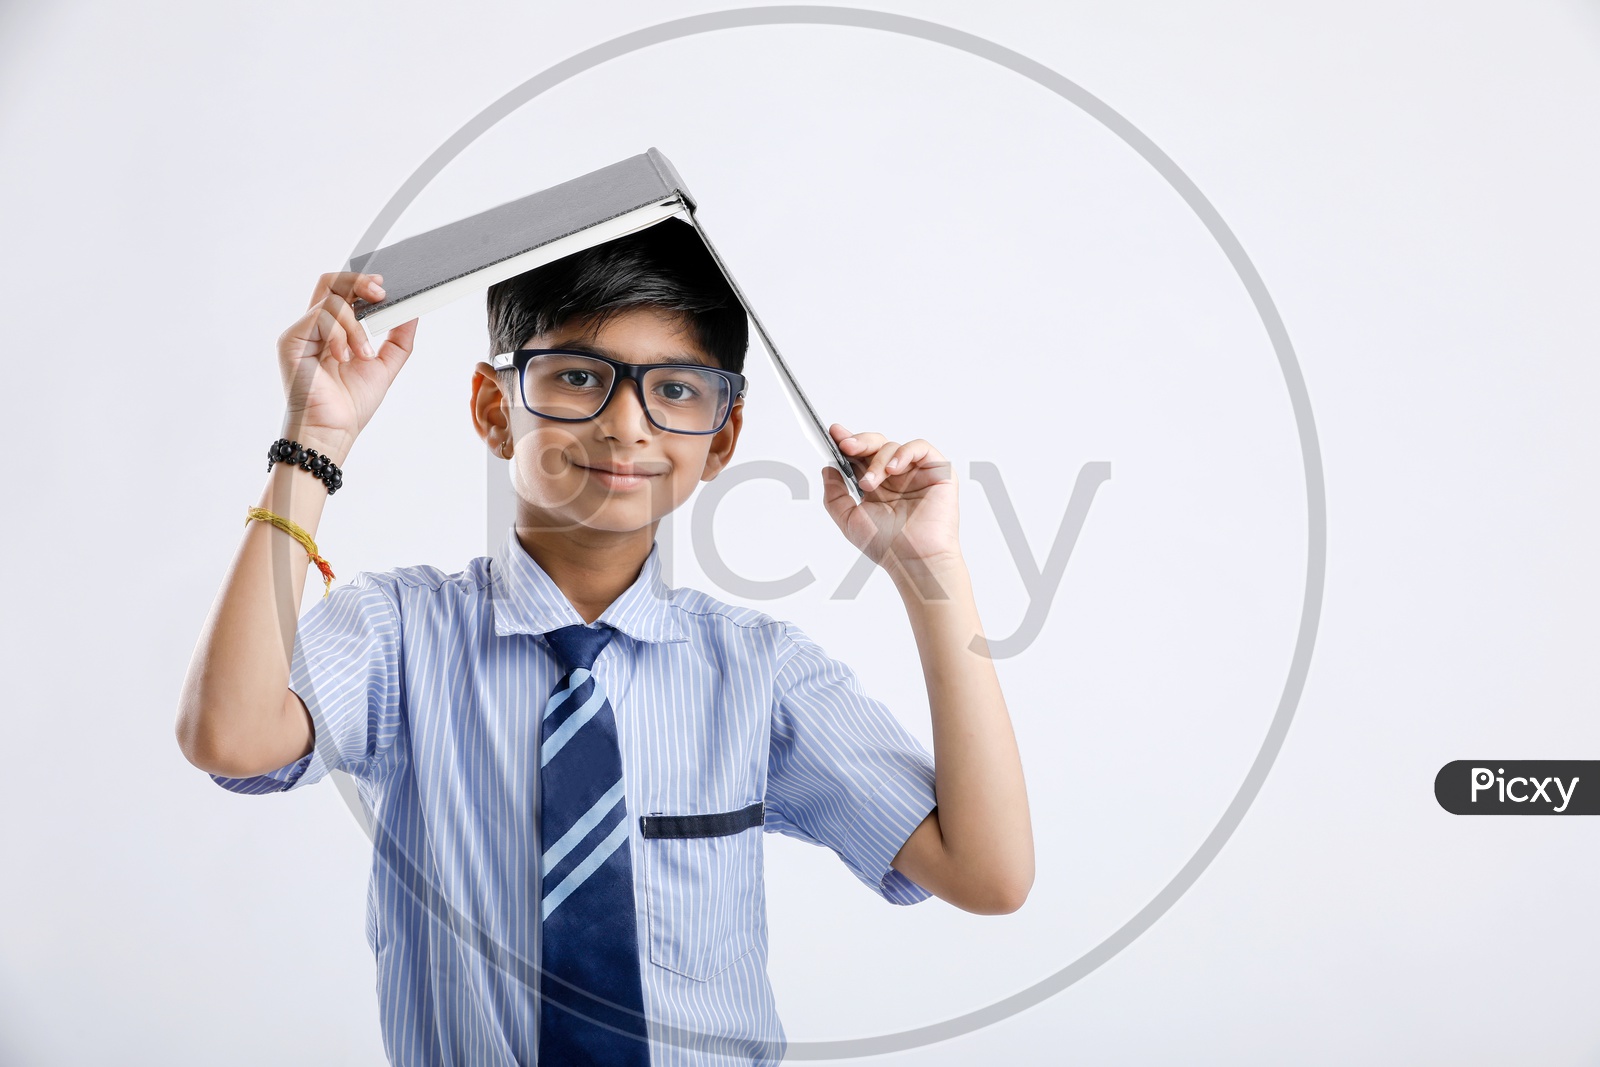 Indian or Asian Kid Or Boy  Or Student In School Uniform And Book On Head Over an Isolated White Background